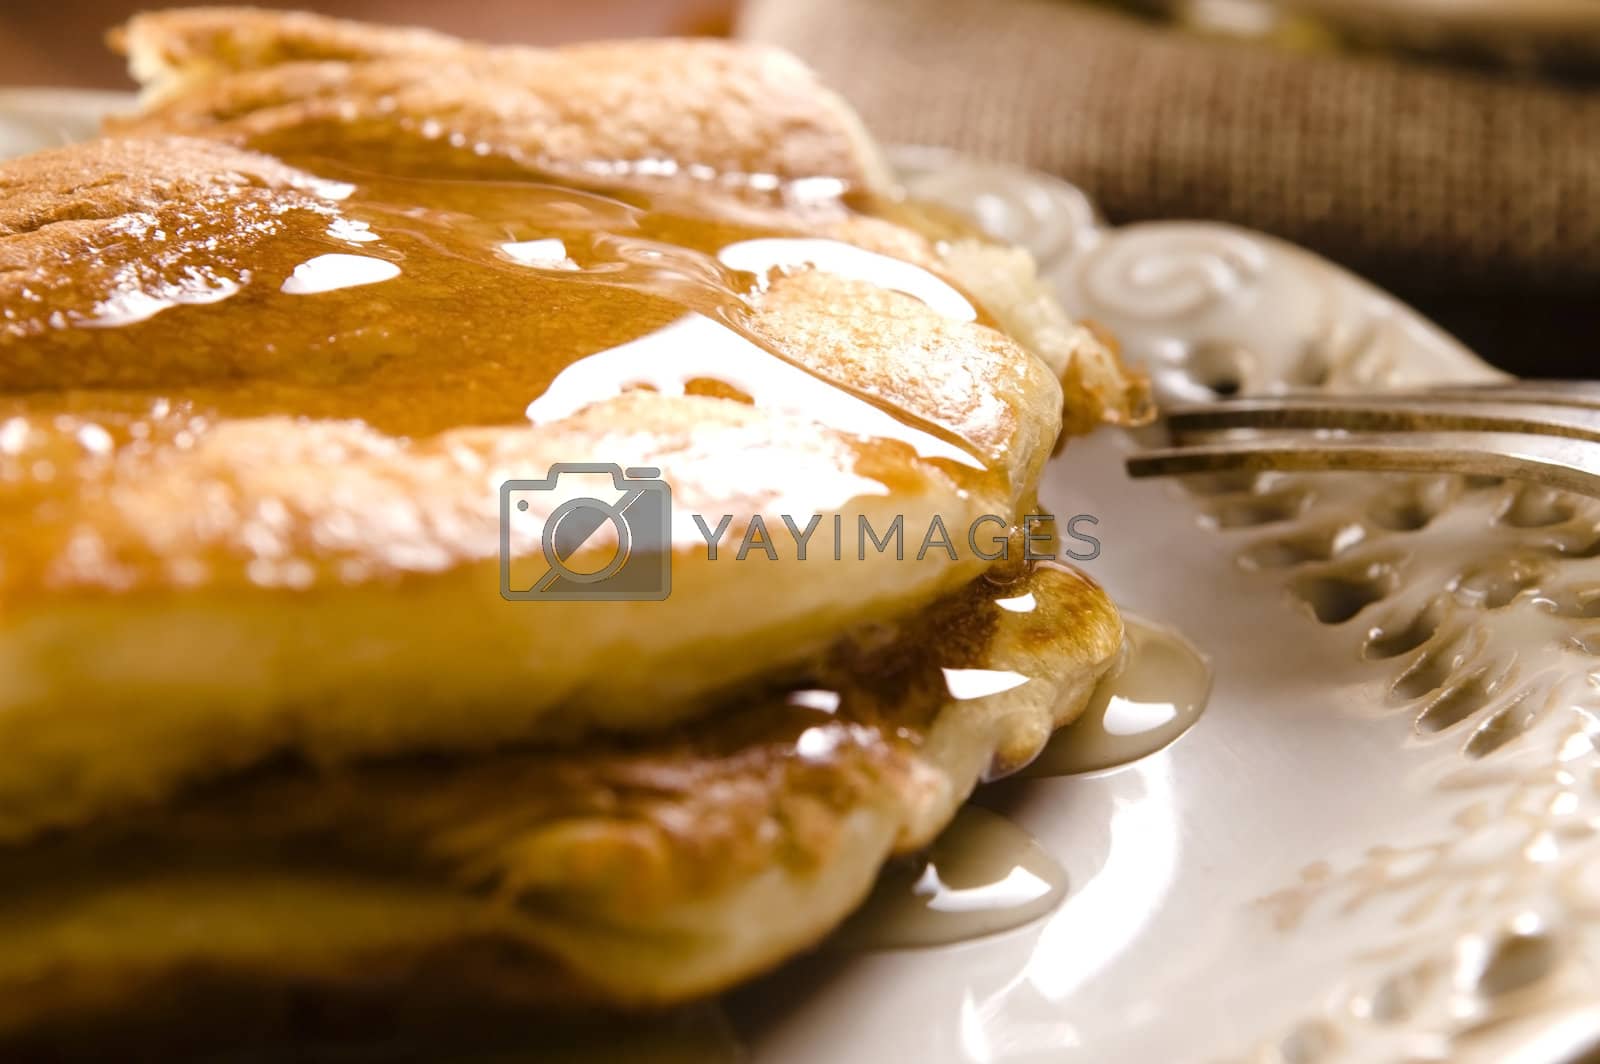 Royalty free image of Pancakes with syrup by joannawnuk